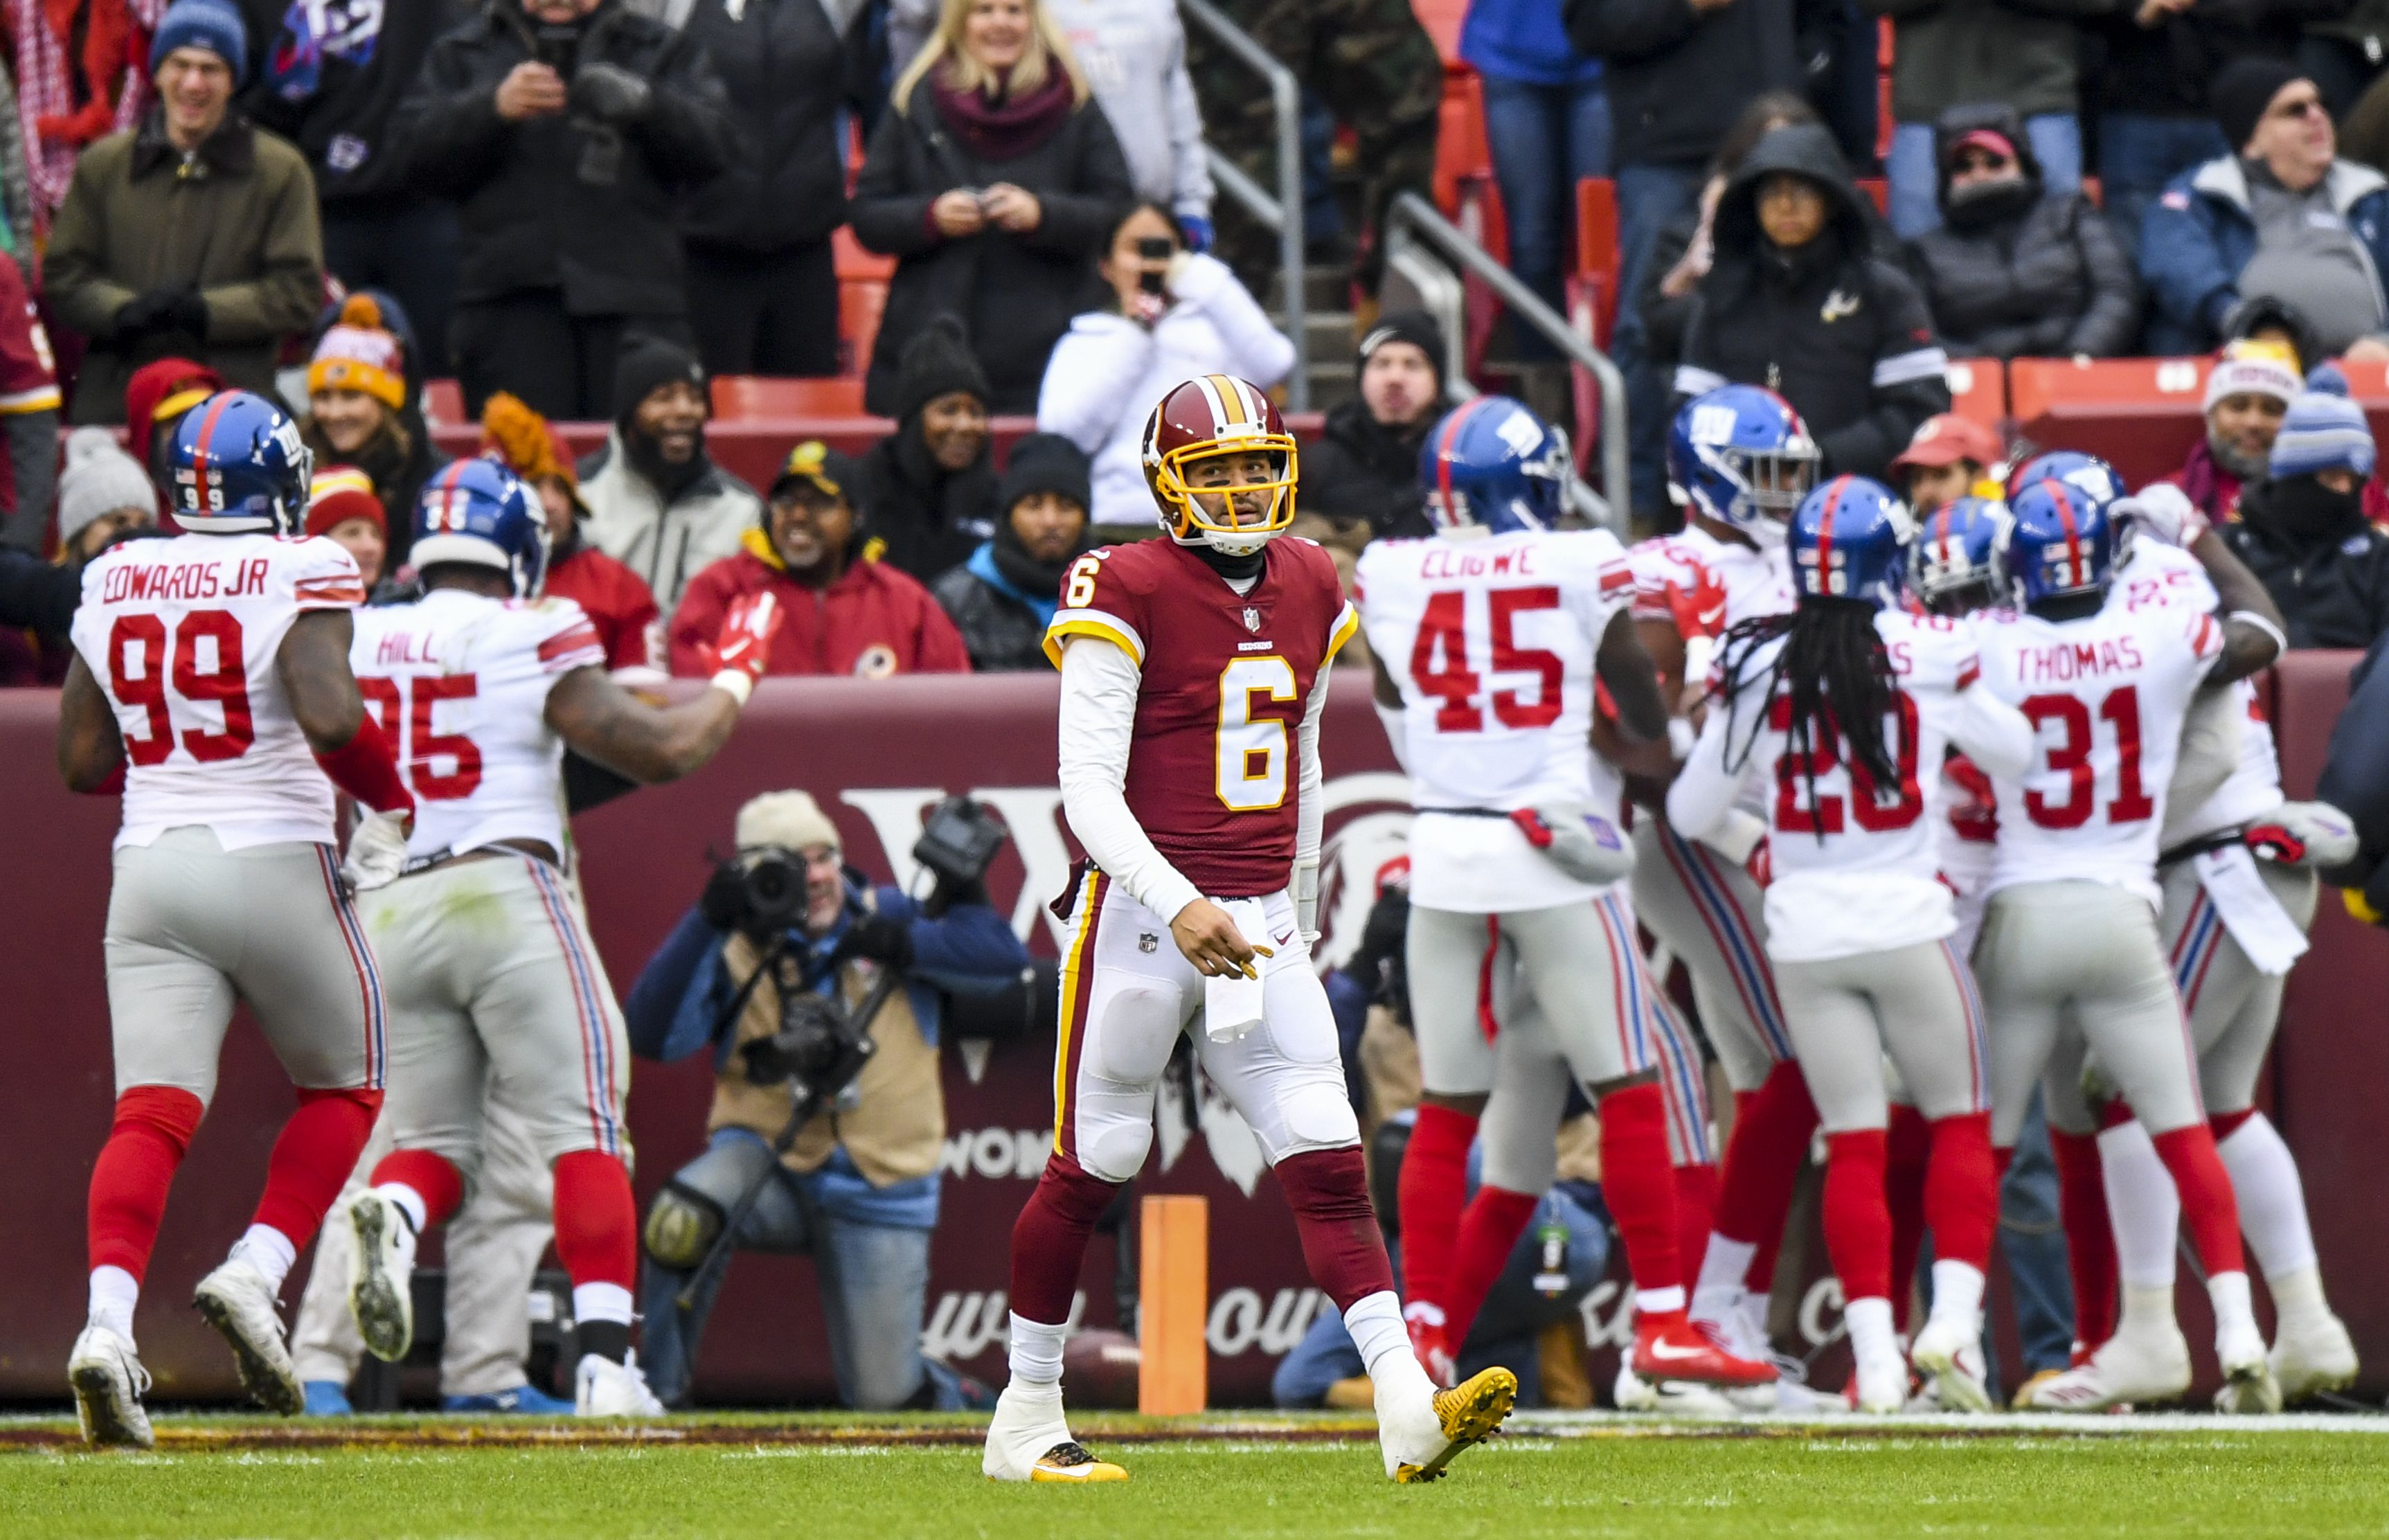 Redskins routed by Giants, 40-16, as many fans leave at halftime of  embarrassing loss - The Washington Post